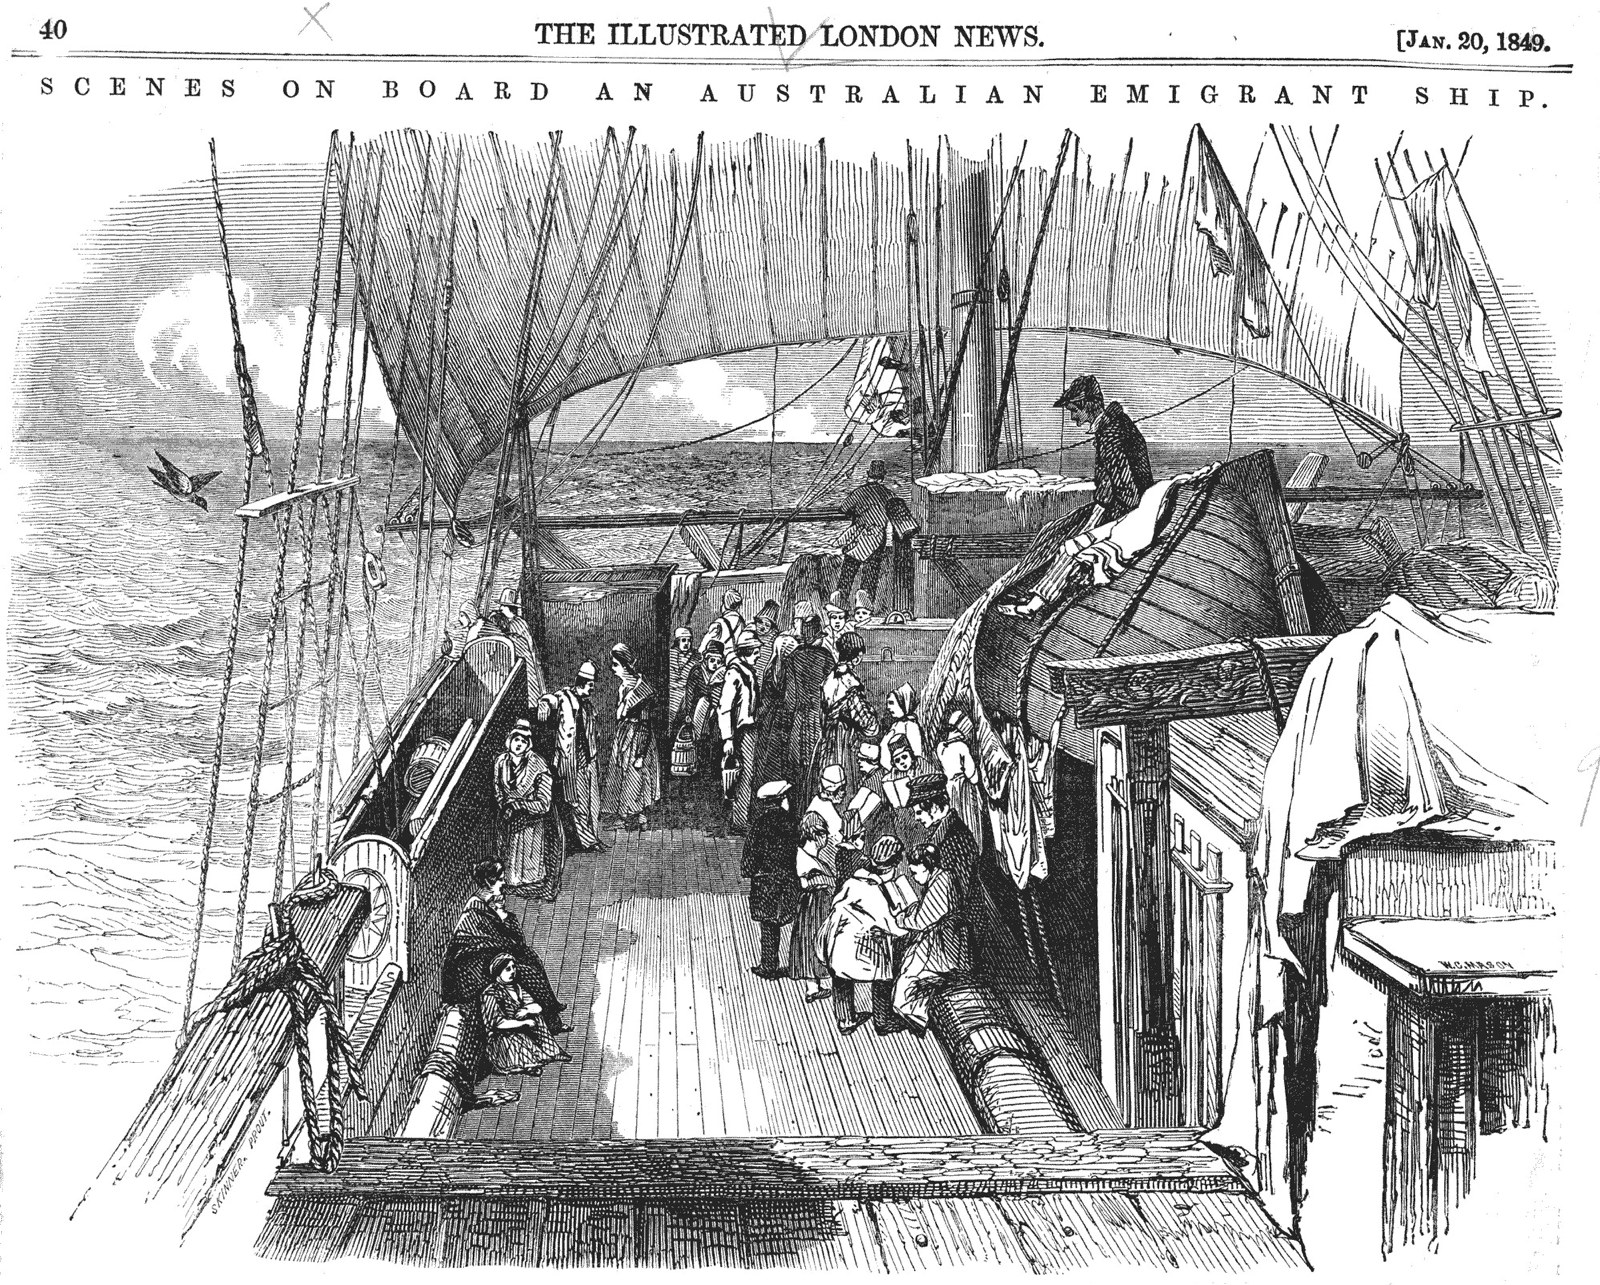 Black and white etching of ship deck with women on board.